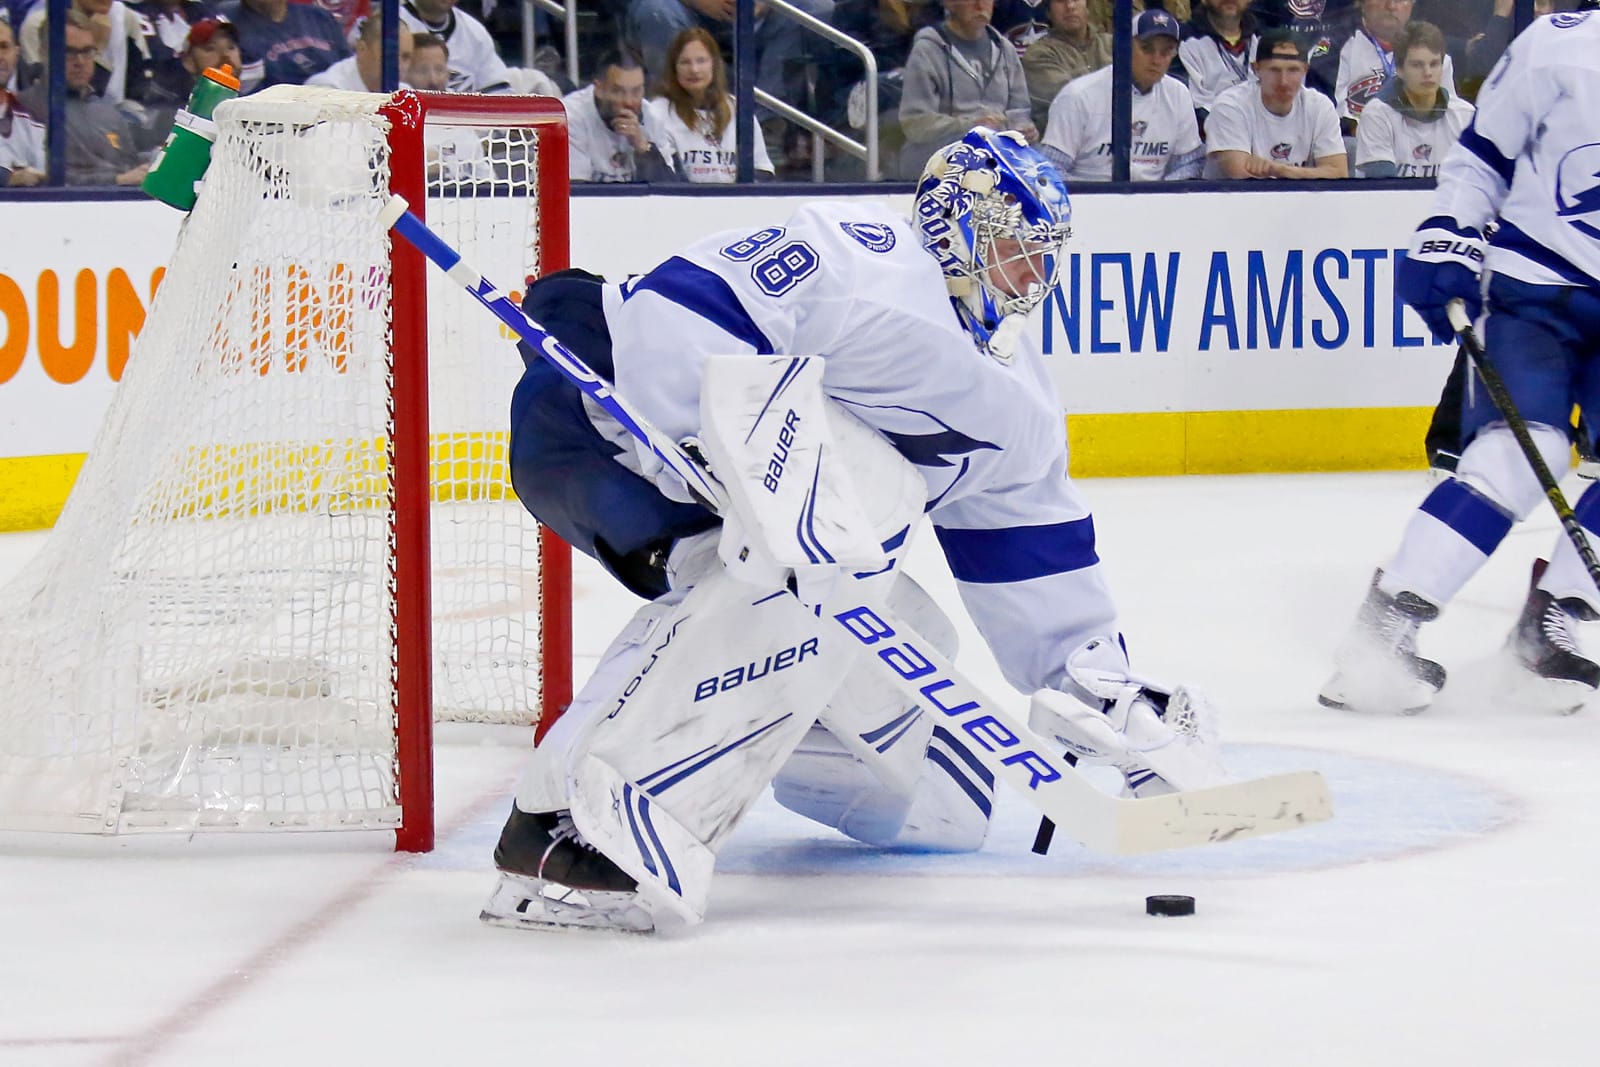 Lightning to use buyout on captain Lecavalier